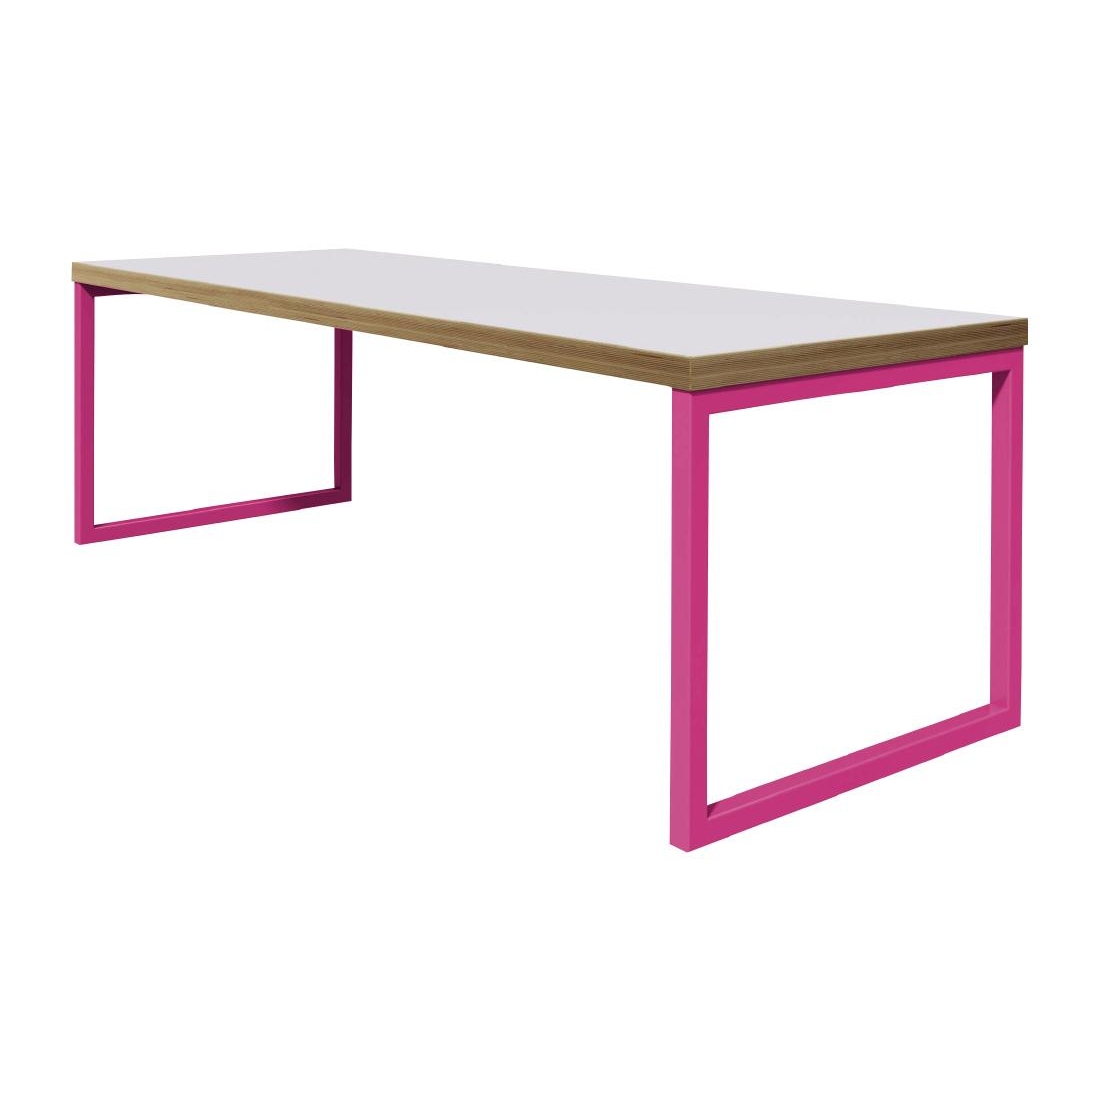 Bolero Dining Table White with Pink Frame 4ft